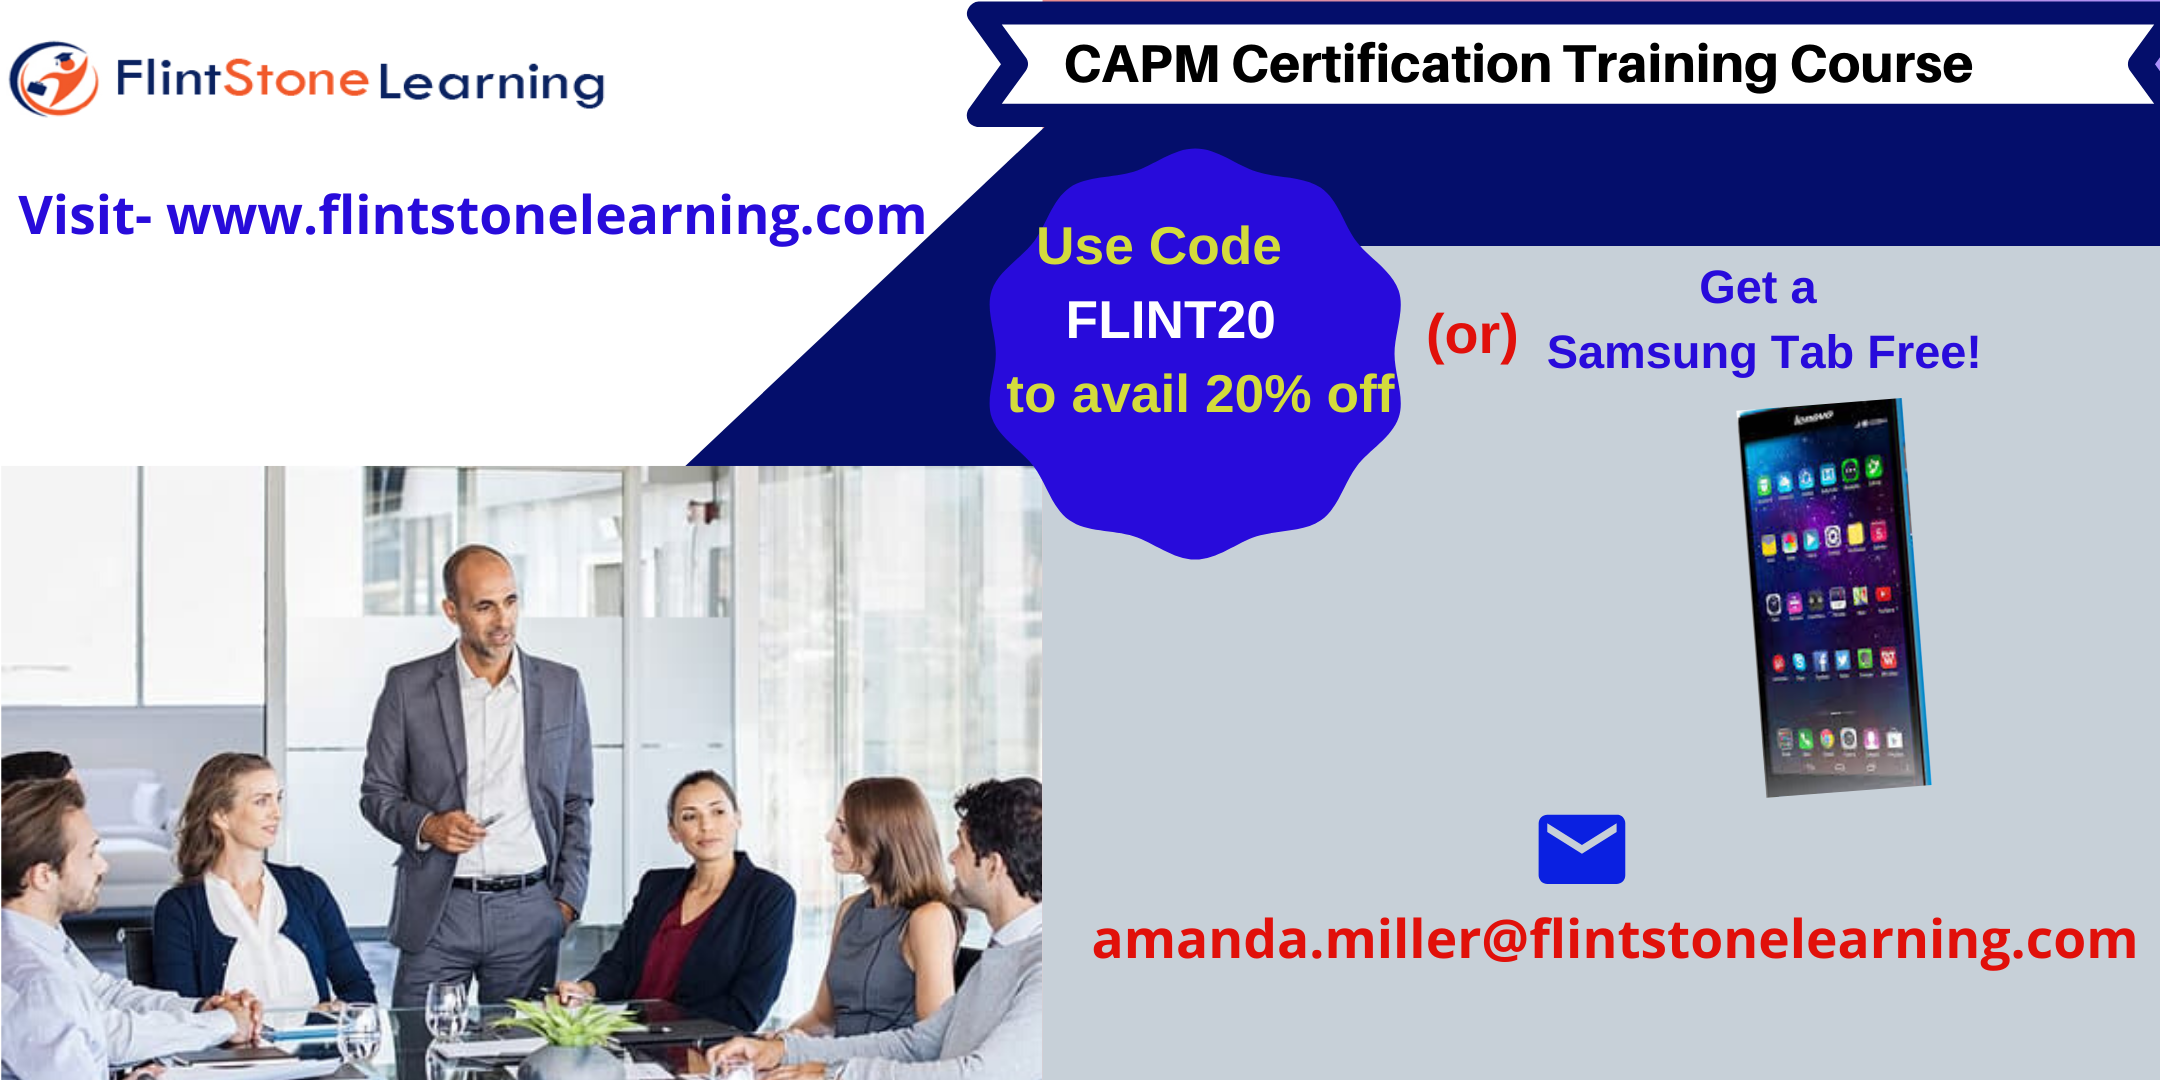 CAPM Certification Training Course in Placerville, CA